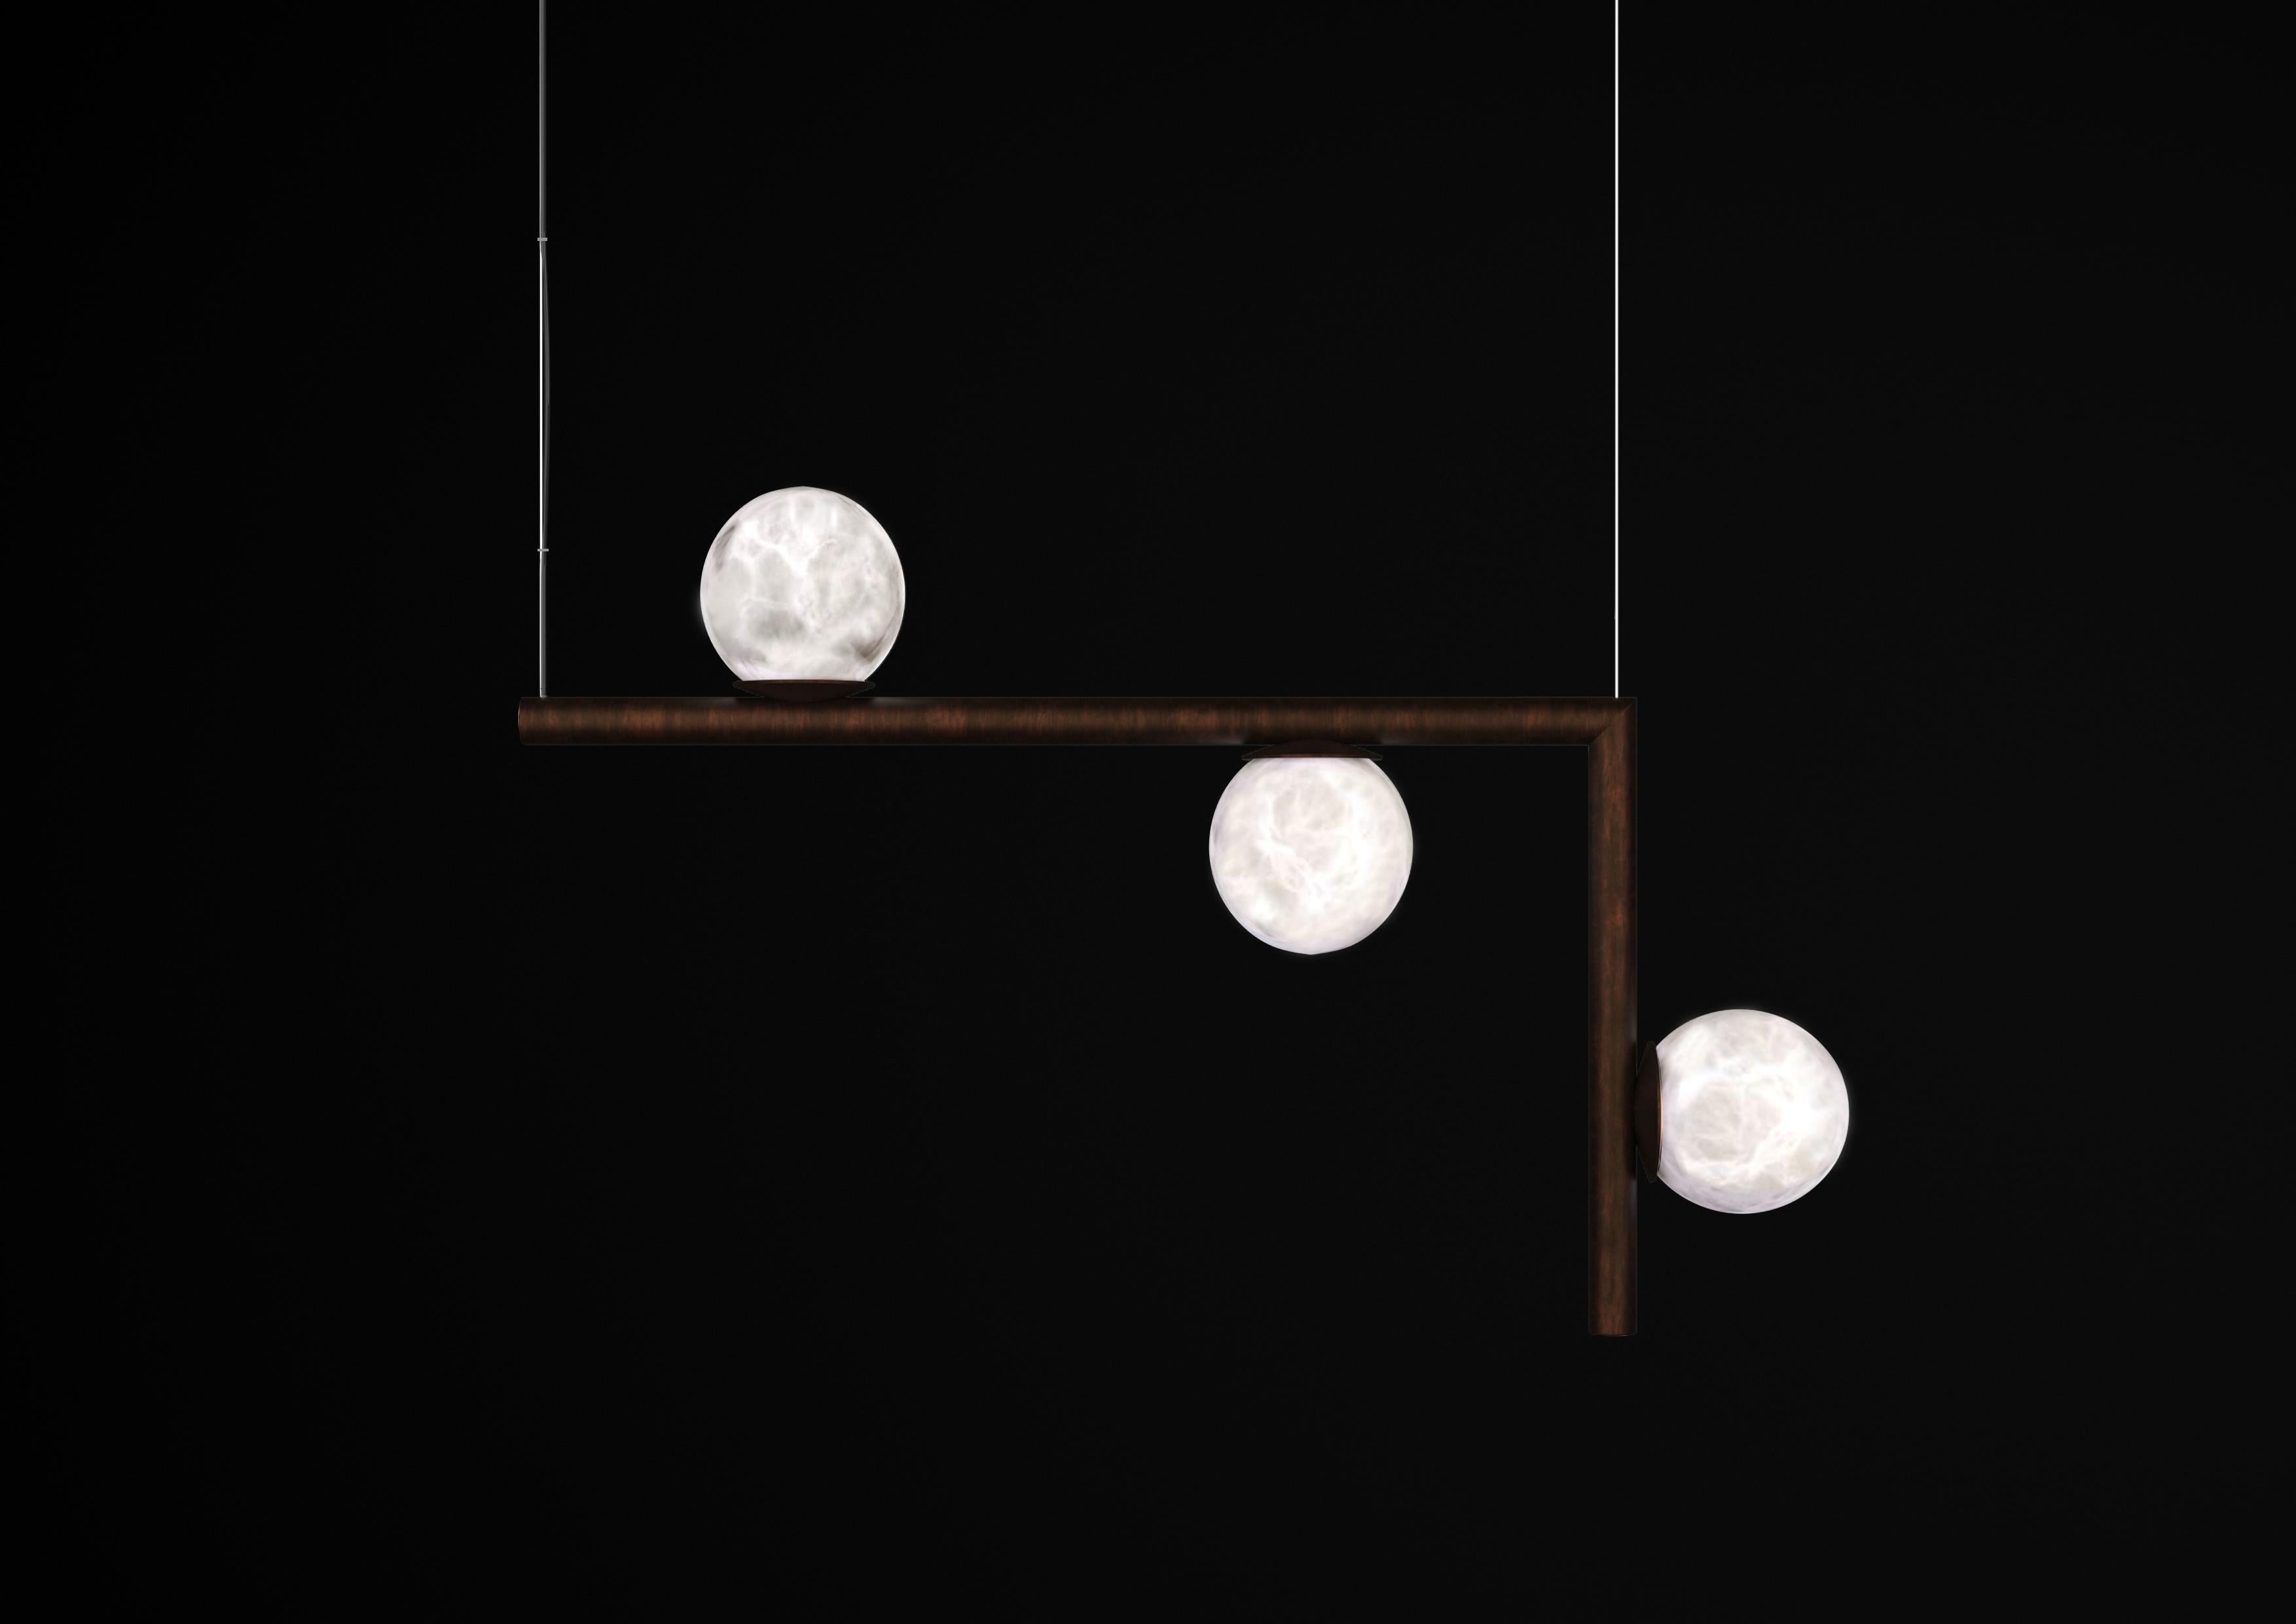 Ofione 2 Ruggine Of Florence Metal Pendant Lamp by Alabastro Italiano
Dimensions: D 14 x W 85 x H 55 cm.
Materials: White alabaster and metal.

Available in different finishes: Shiny Silver, Bronze, Brushed Brass, Ruggine of Florence, Brushed